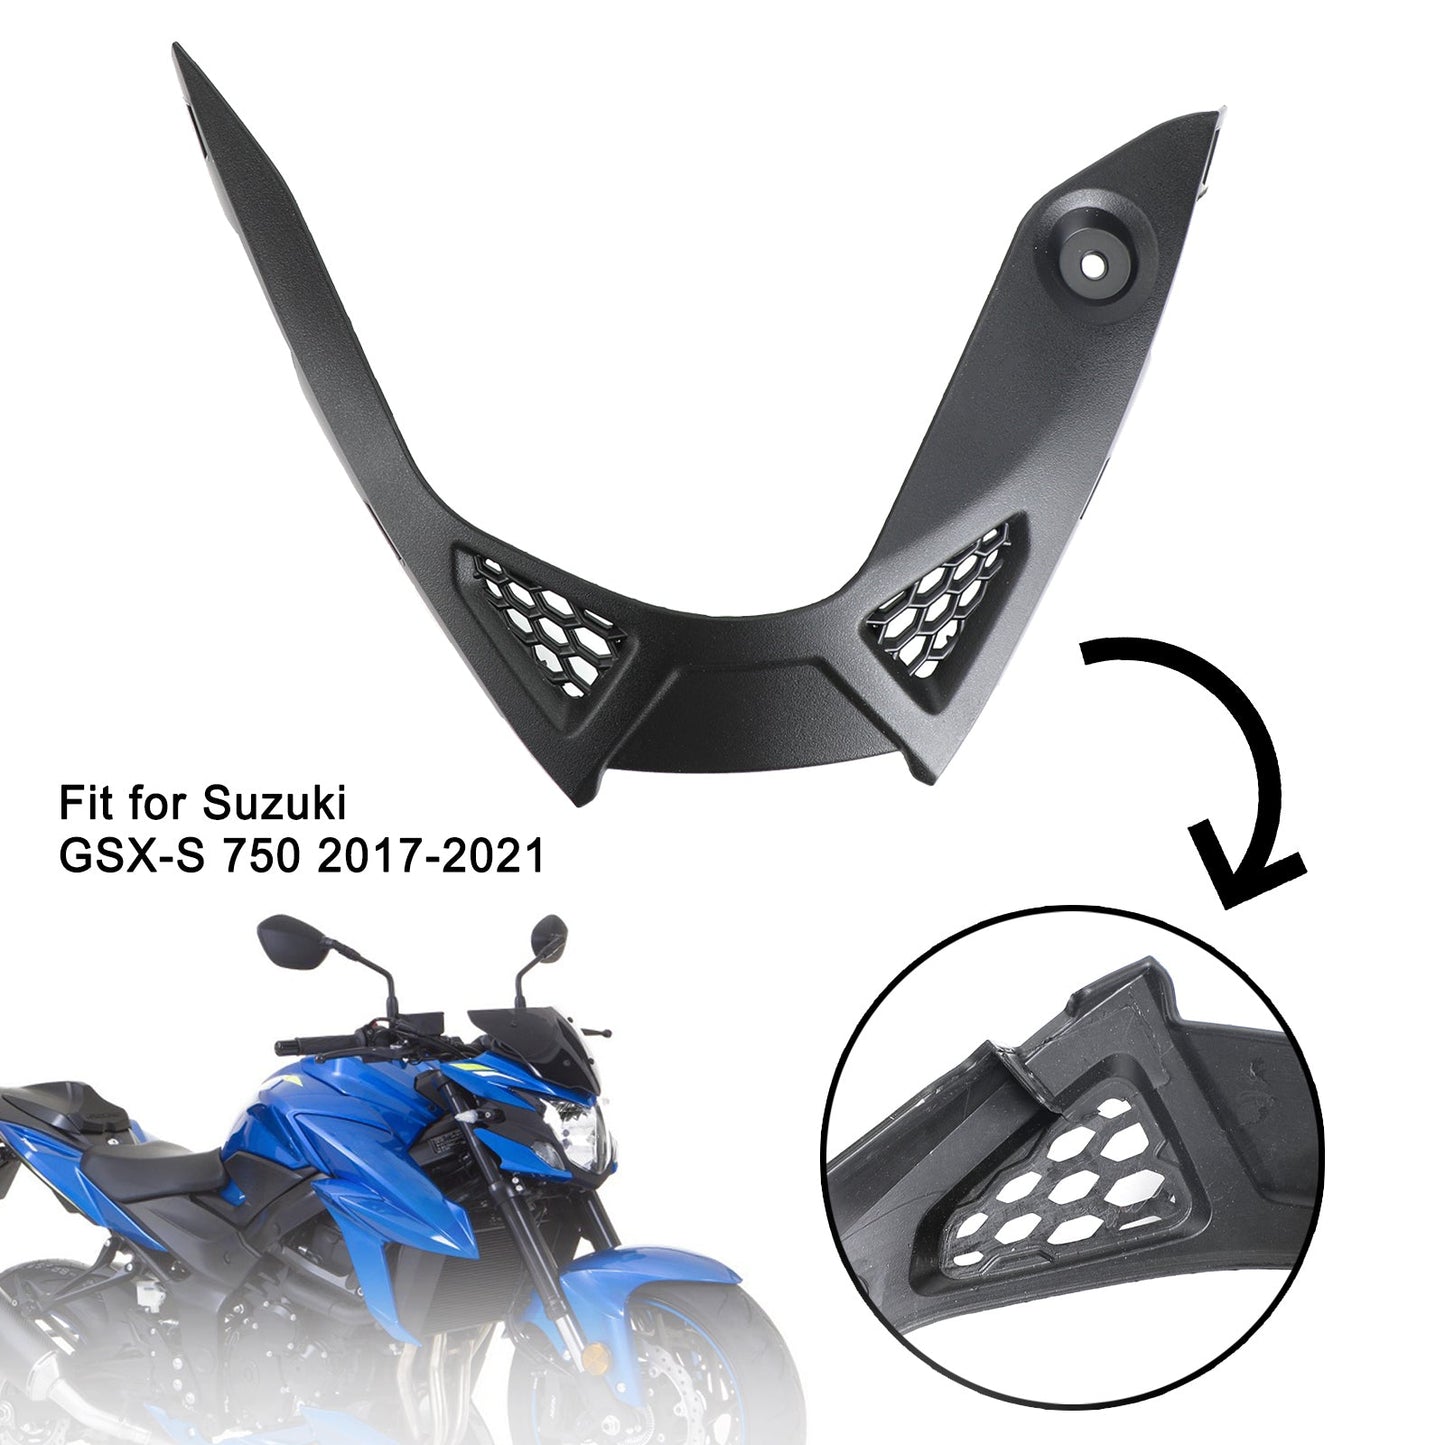 Lower Protection Cover Fairing Plates for Suzuki GSXS GSX-S750 2017-2021 Black